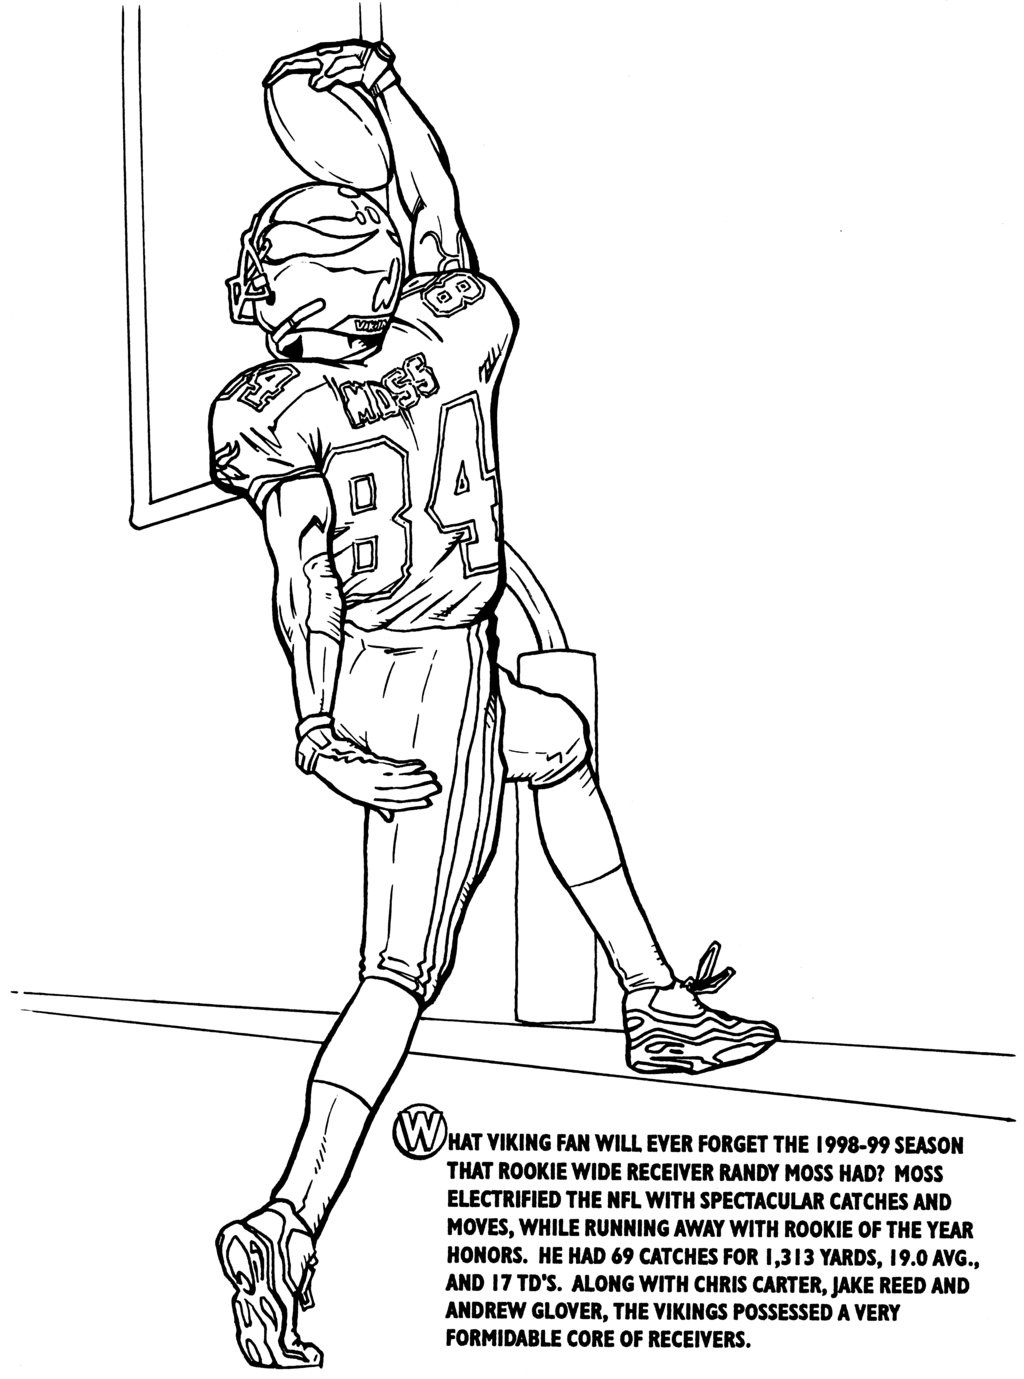 Coloring Pages Of Odell Beckham Jr